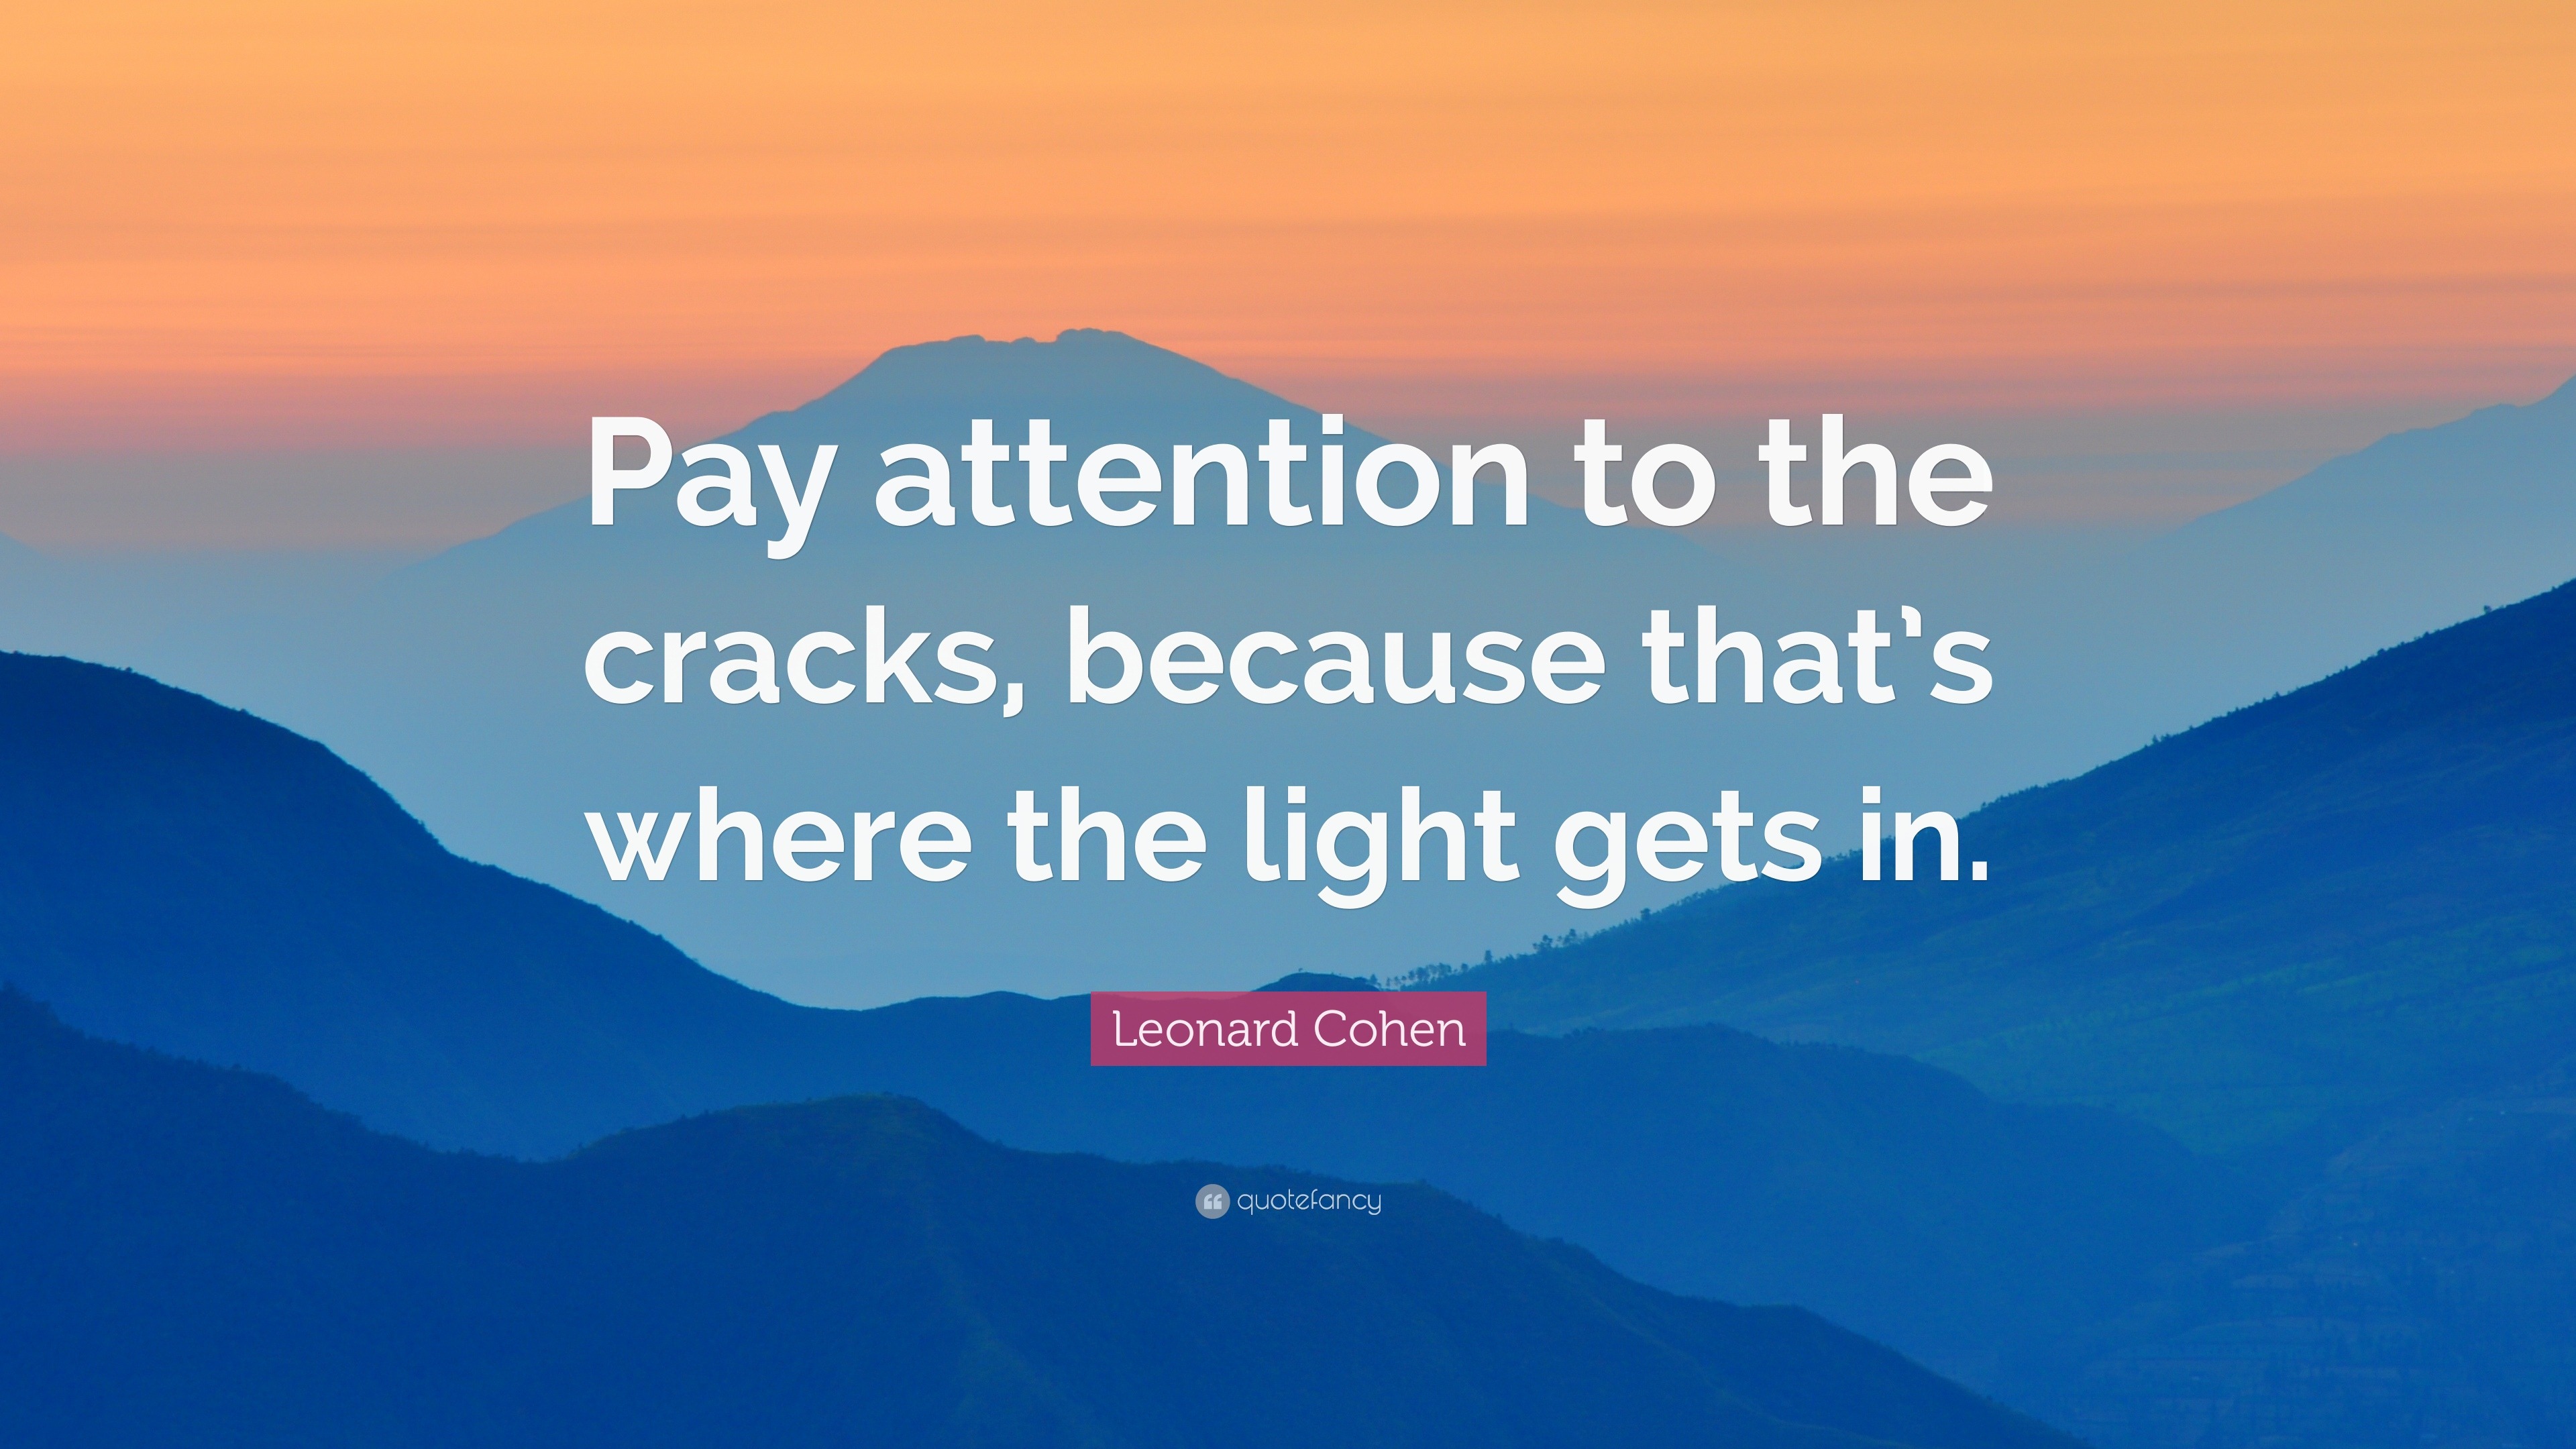 "pay attention to the cracks, because that"s where the light